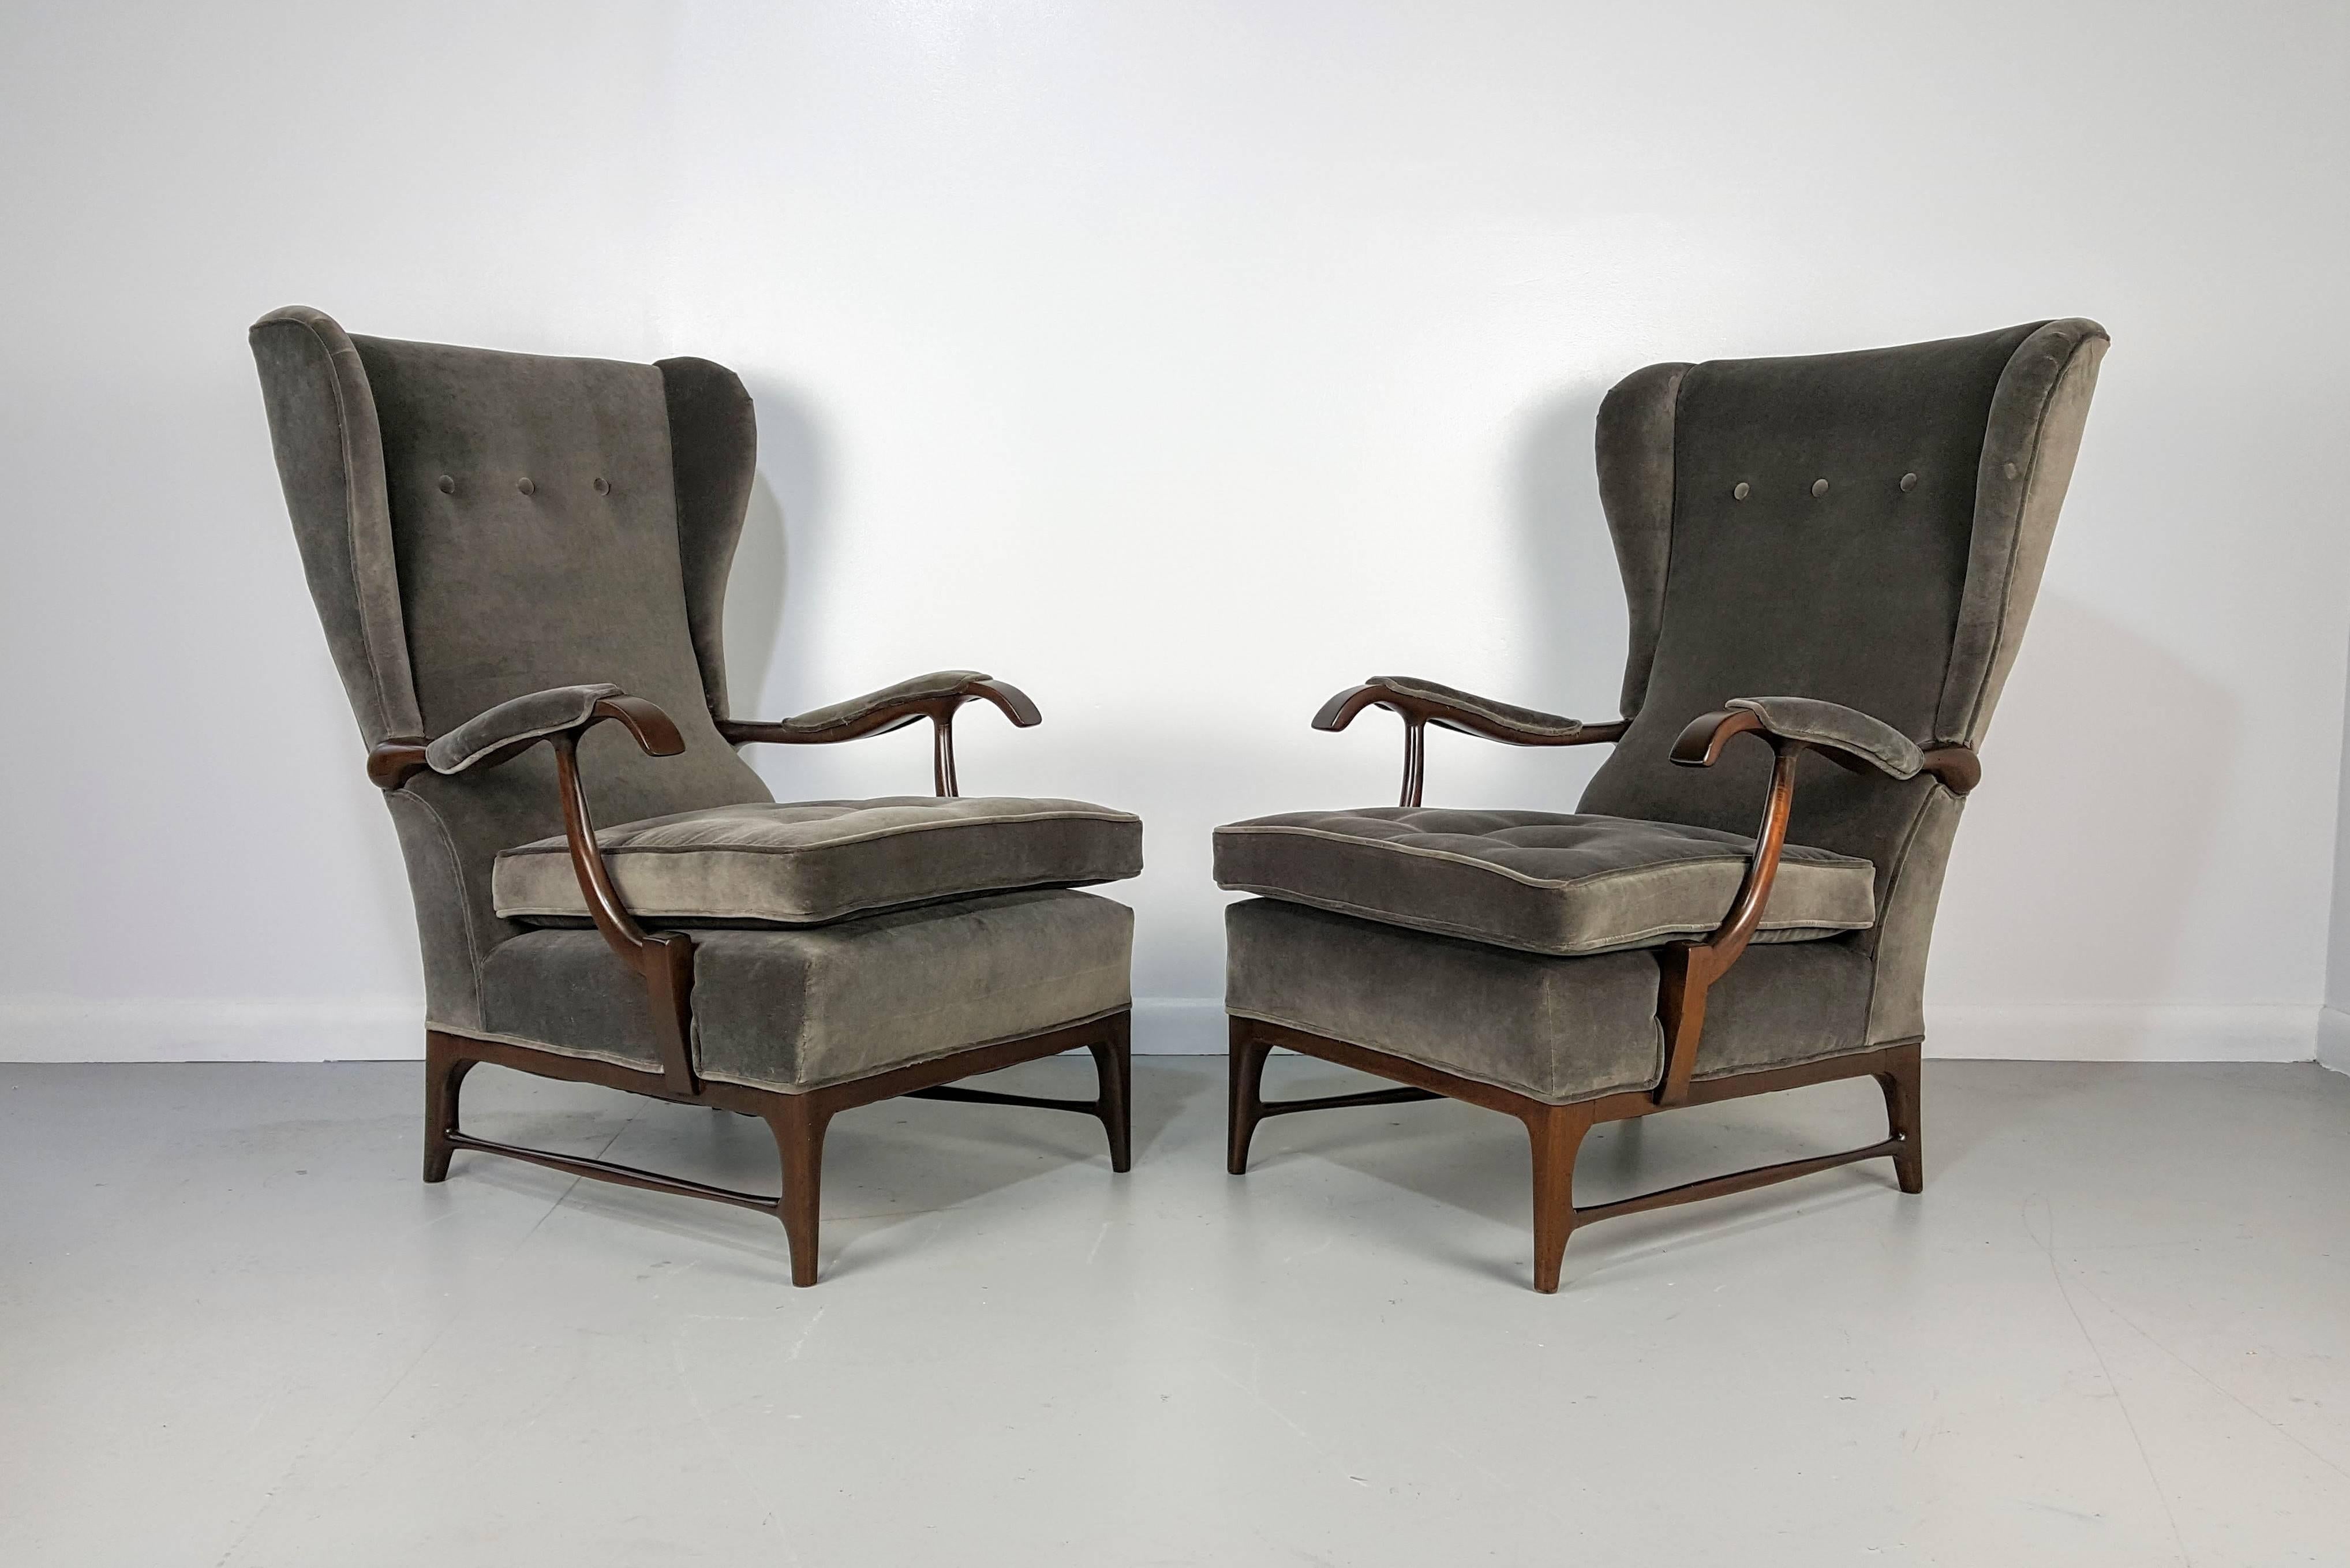 Pair of wingback lounge chairs by Paolo Buffa, Italy, 1950s. Beautifully restored with dark mahogany frames and charcoal velvet. 

See this item in our private NYC showroom! Refine Limited is located in the heart of Chelsea at the history